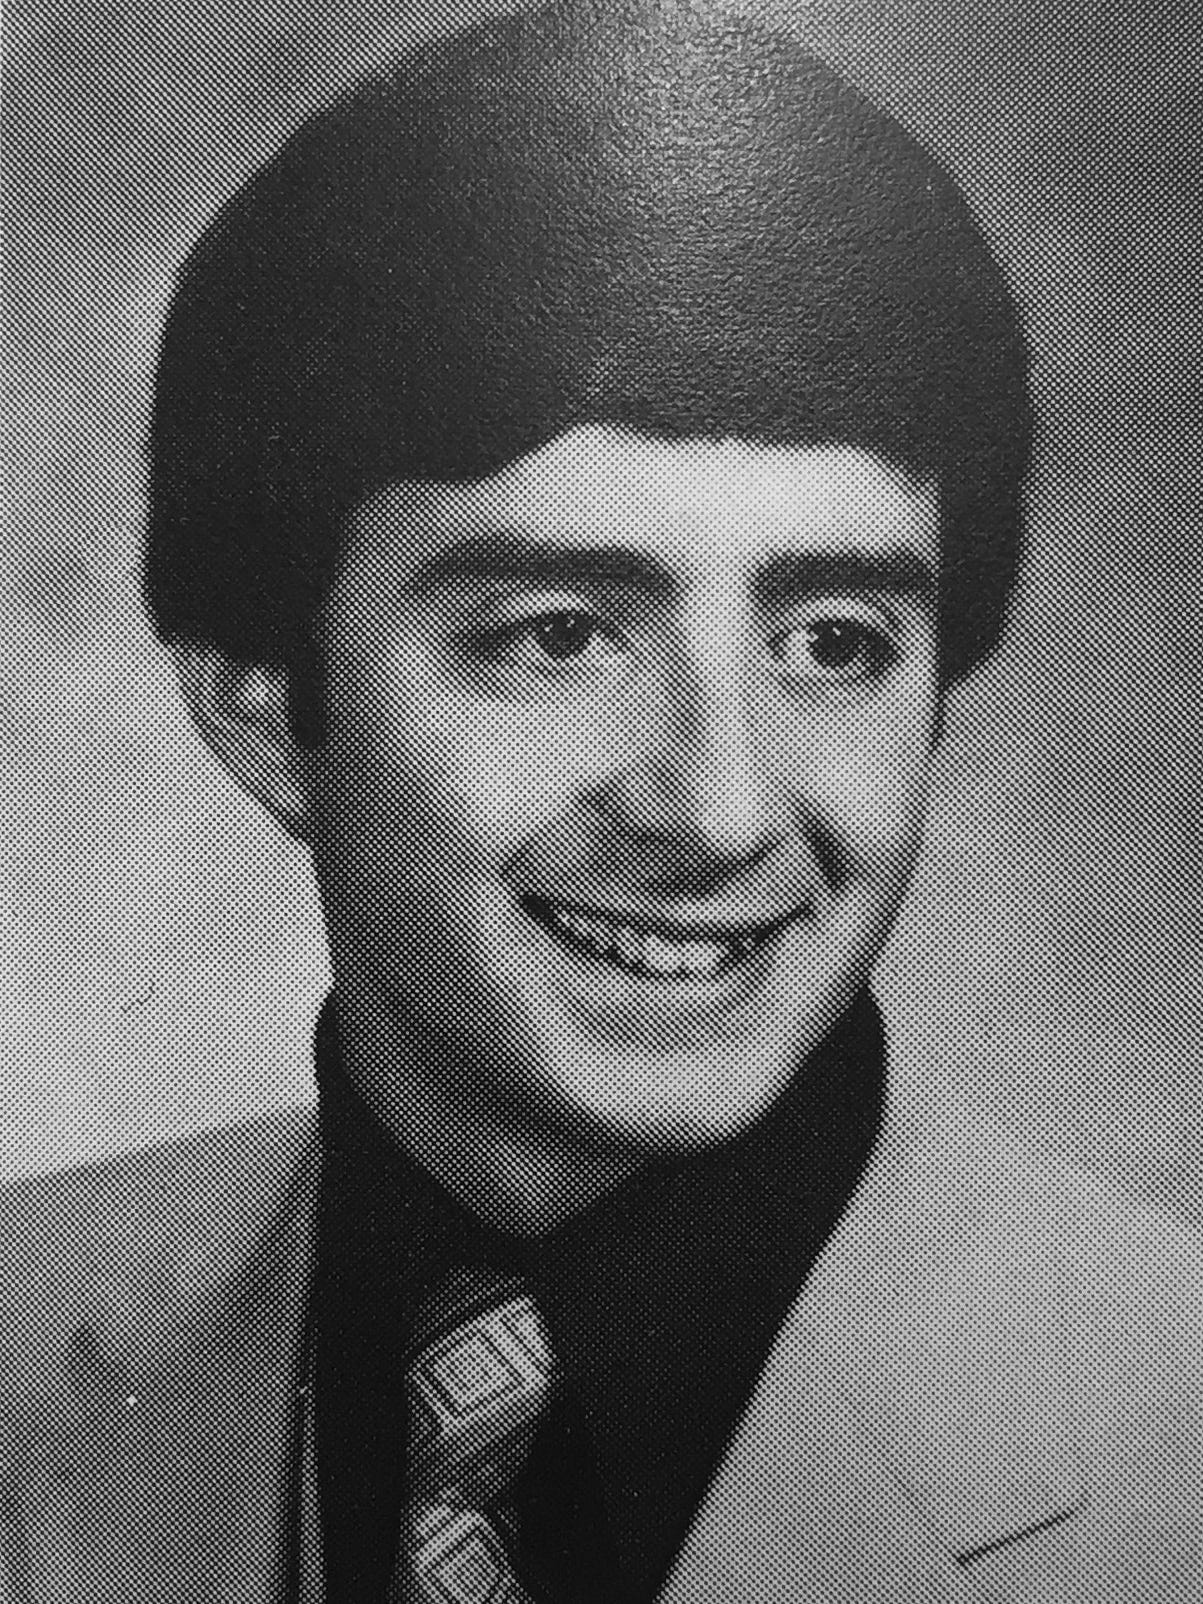 Larry Nassar yearbook photo from North Farmington High School, where he graduated in 1981.